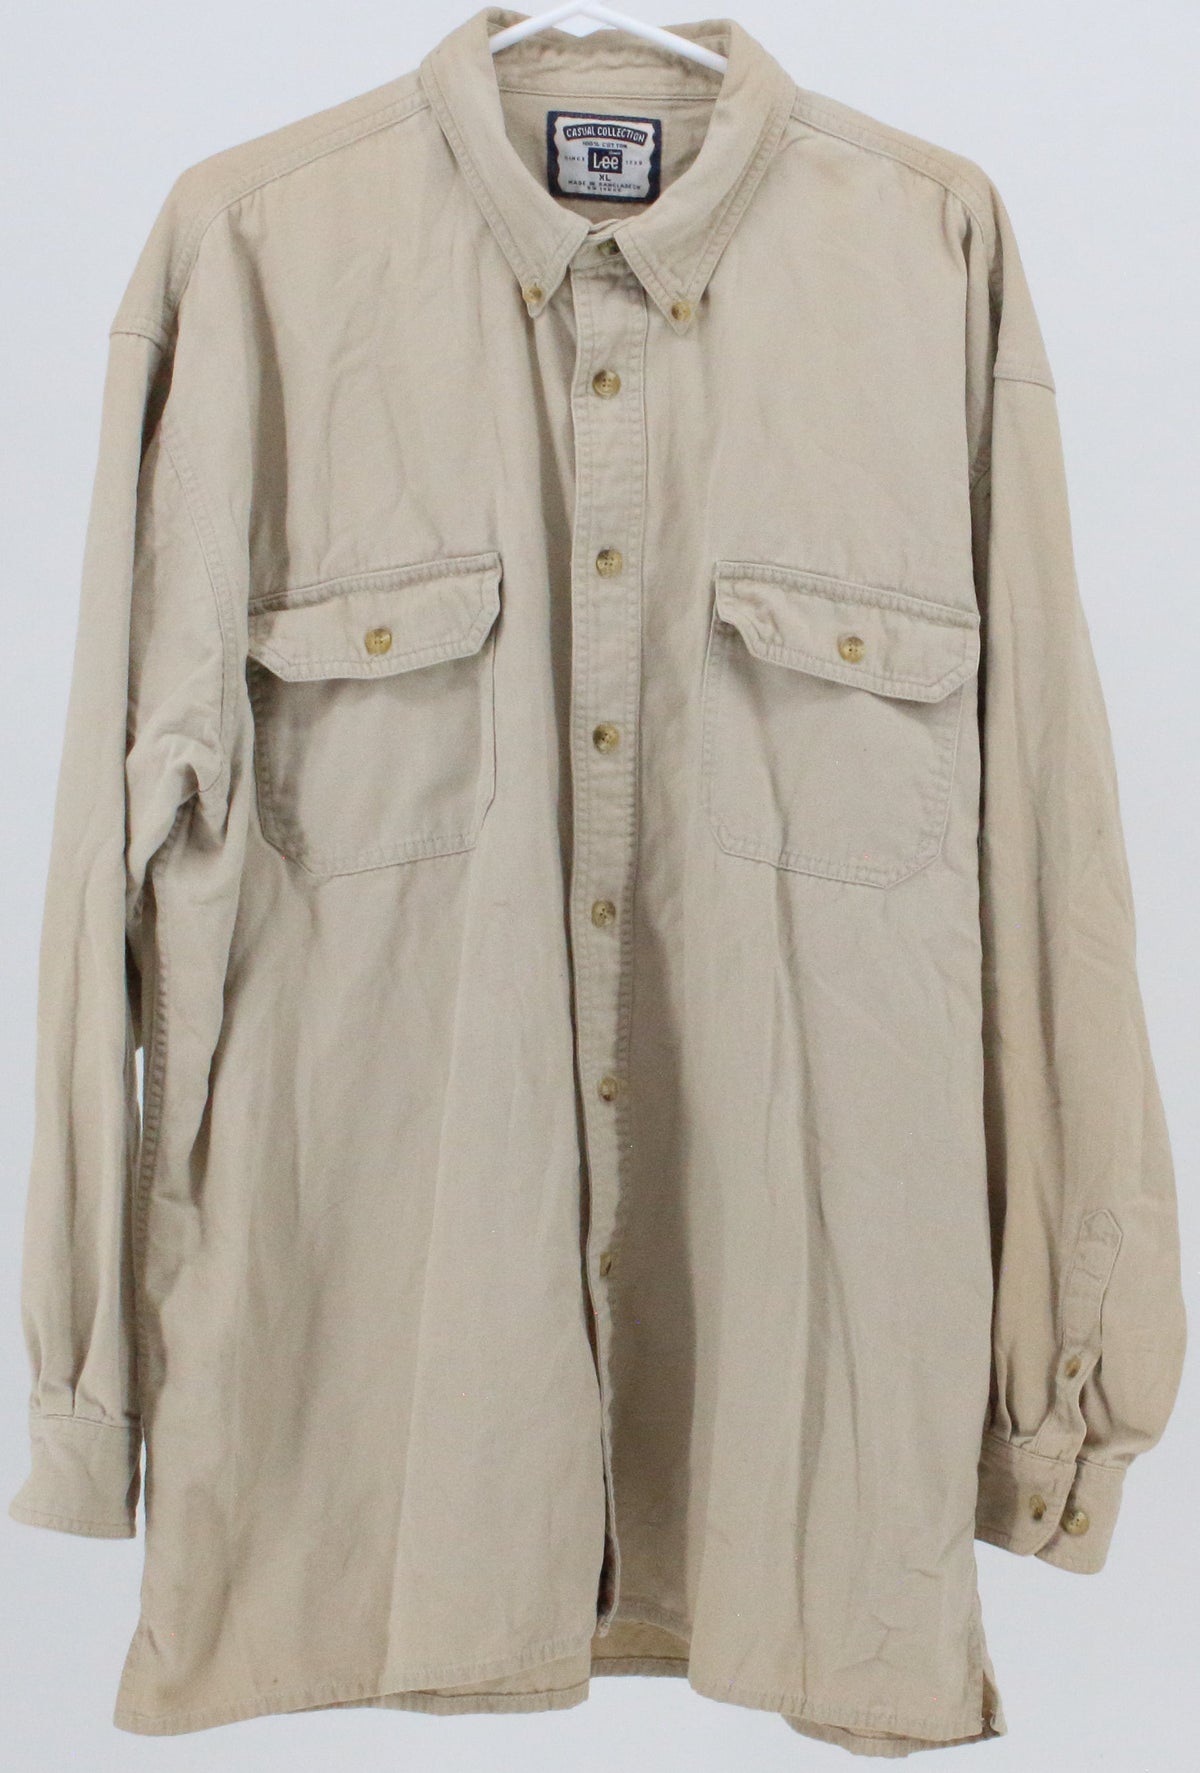 Lee Casual Collection Beige Shirt